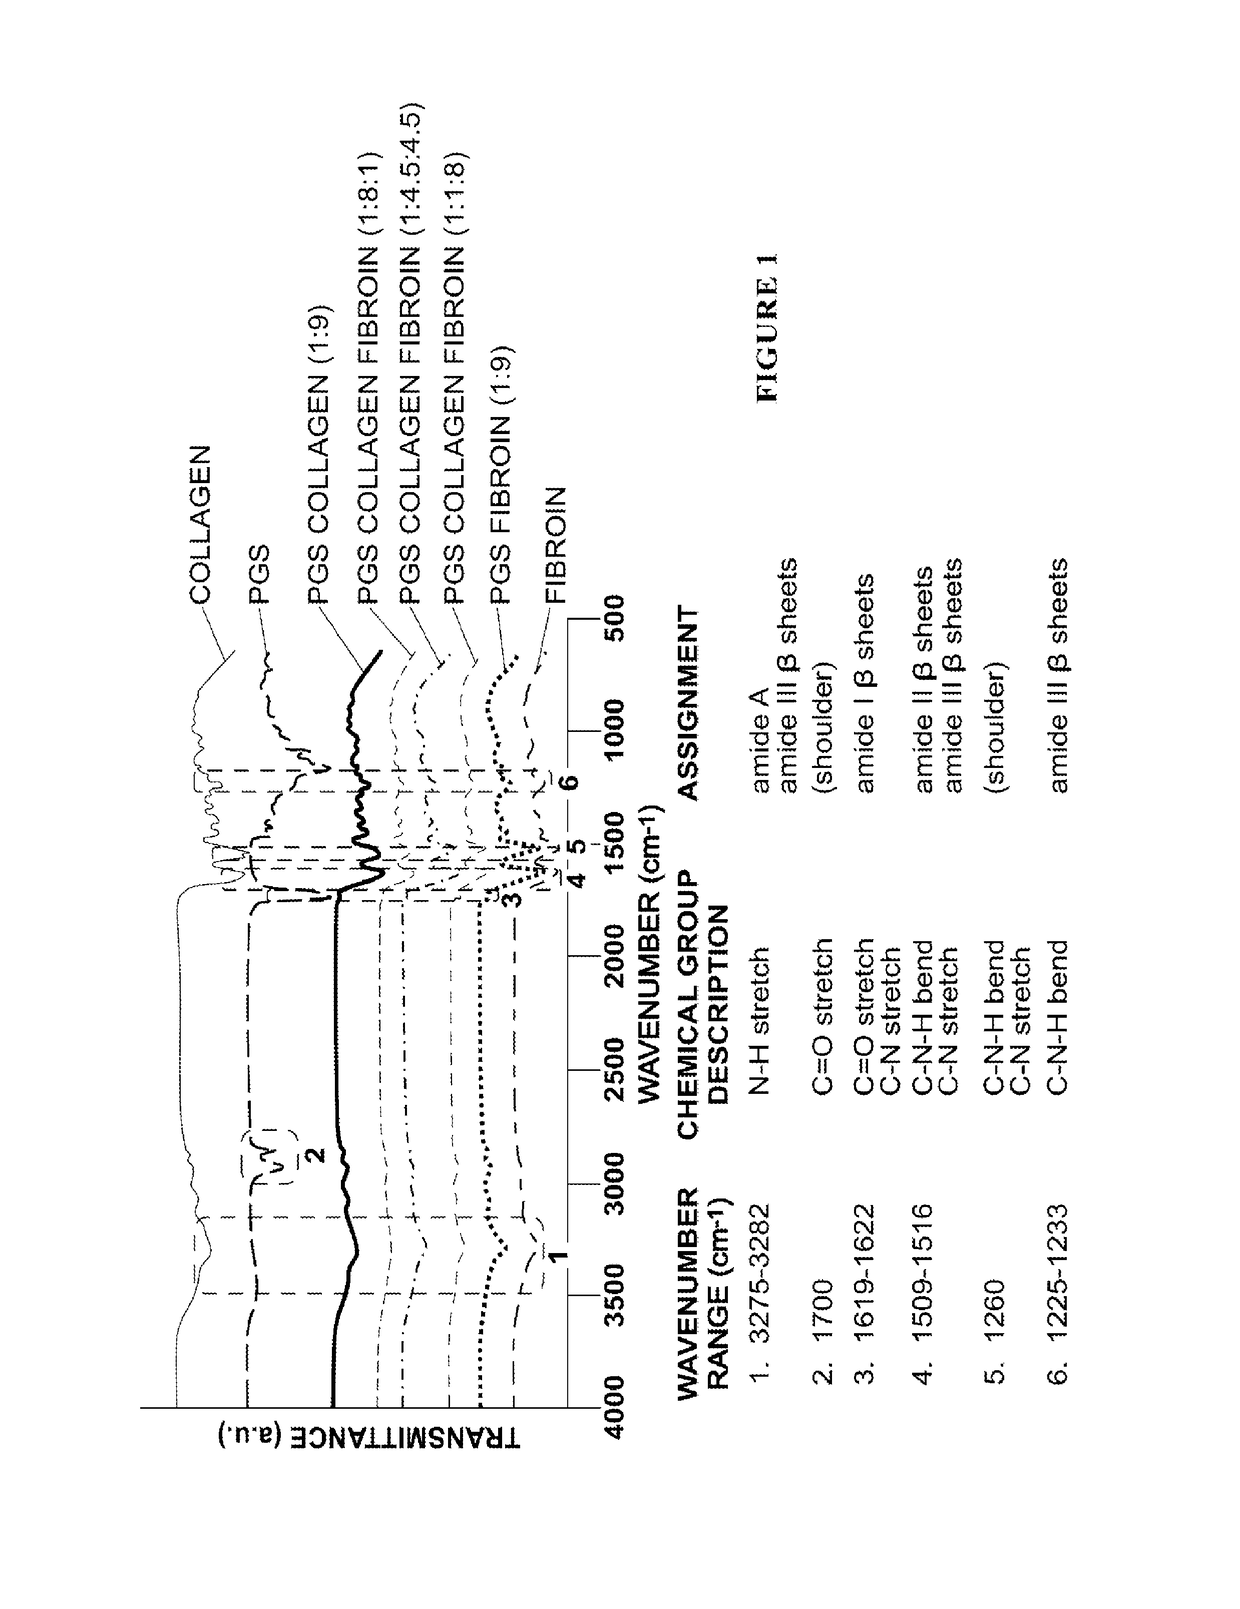 Nanofiber-based graft for heart valve replacement and methods of using the same